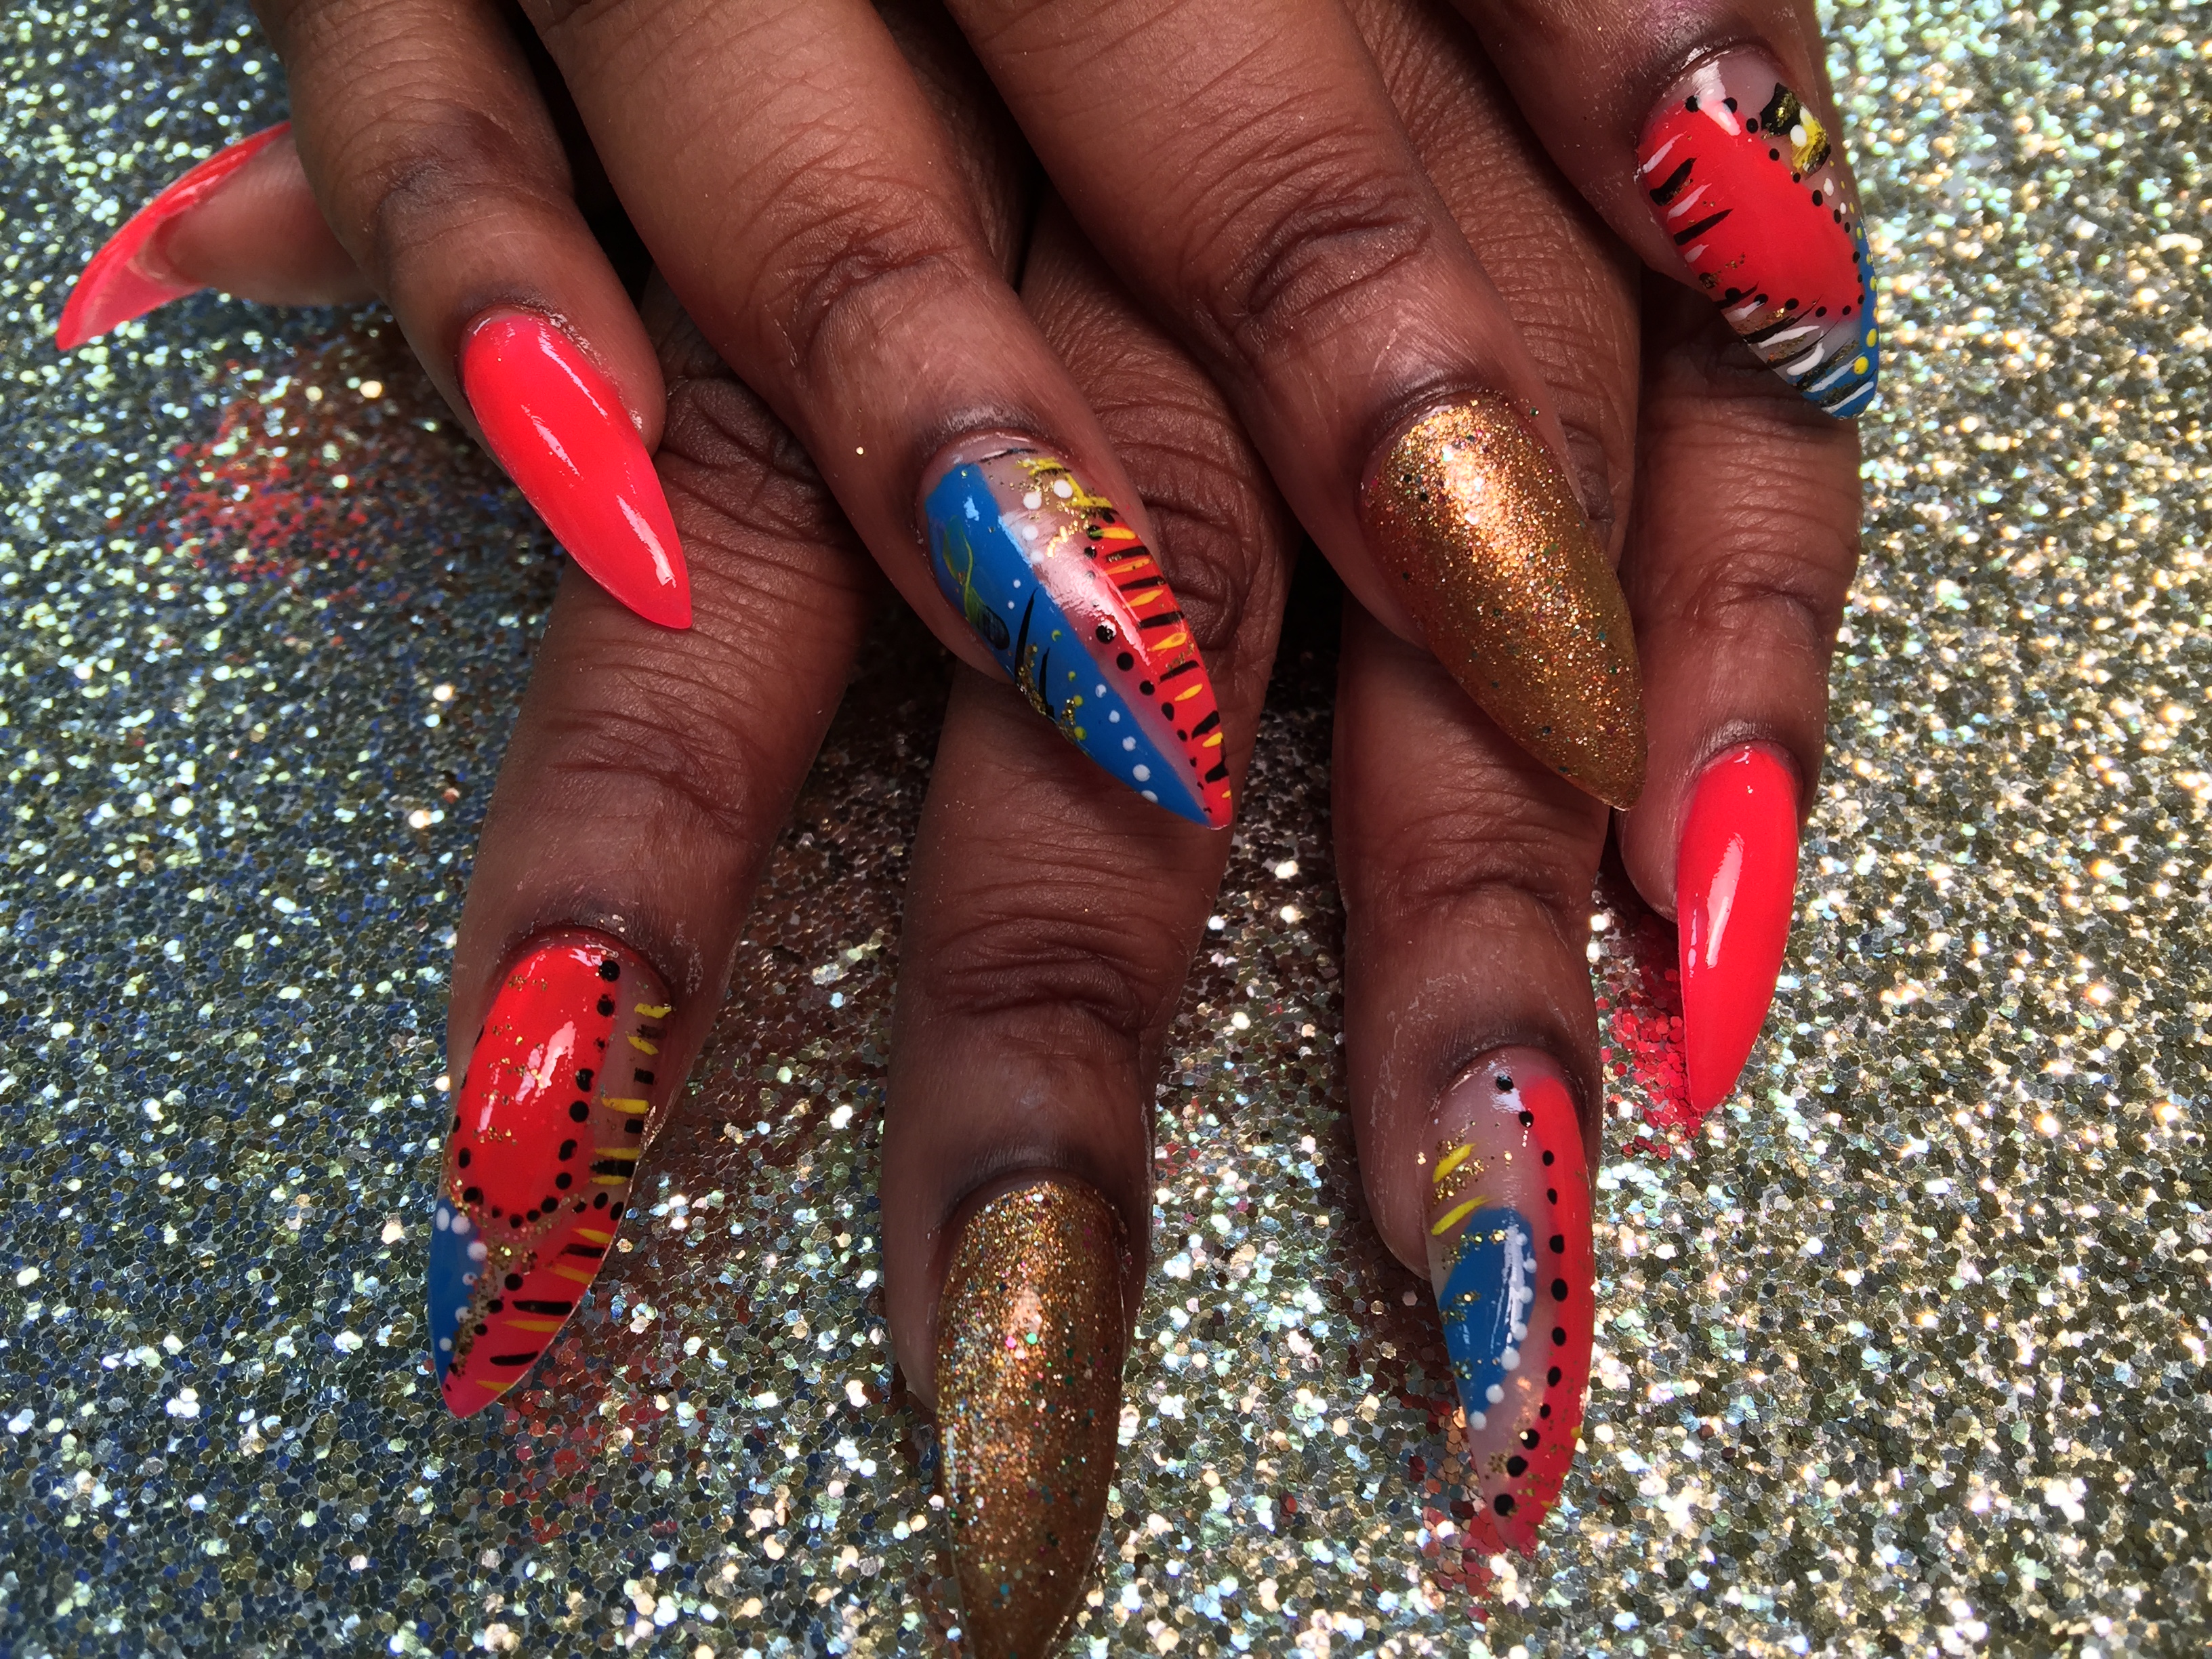 10. Afro Nail Designs - wide 5